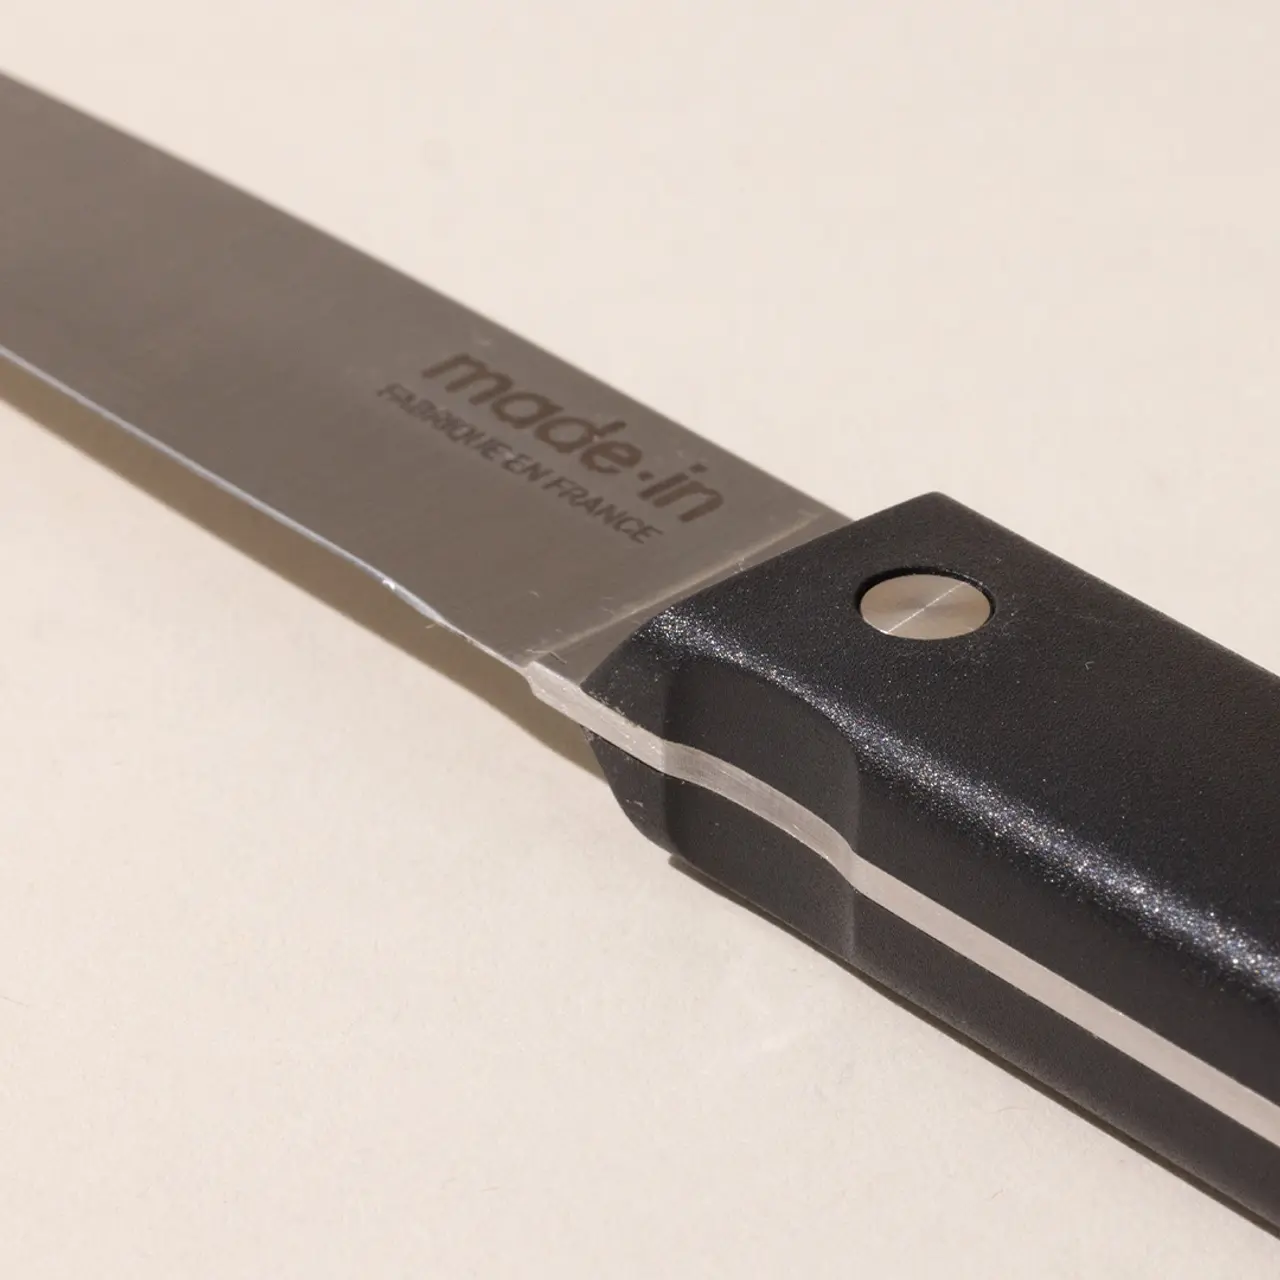 A close-up of a kitchen knife with the text "made in" on the blade and a black handle with a rivet.